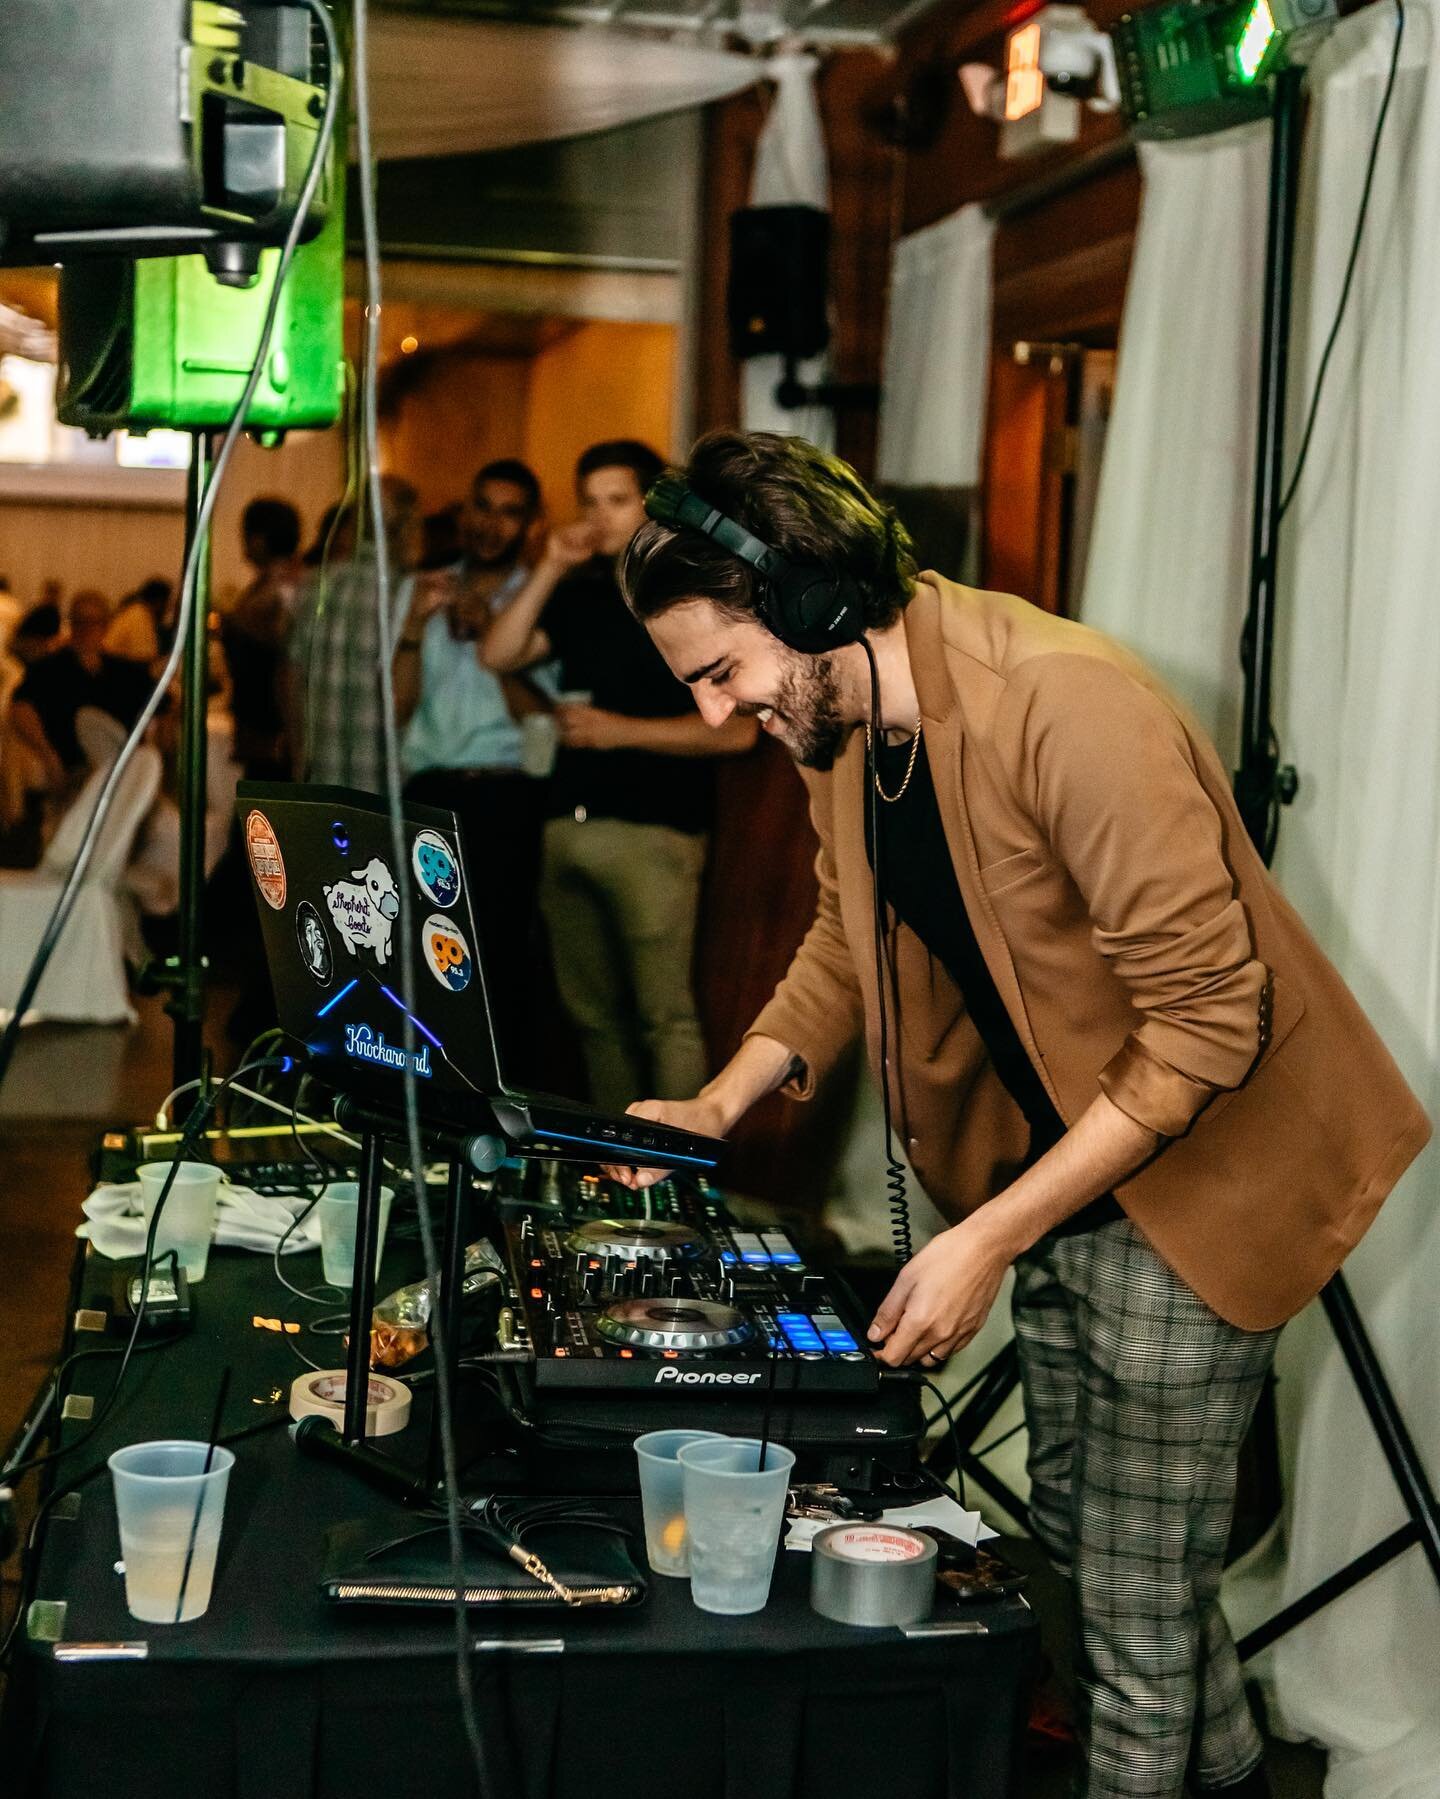 im smiling in this picture but look closer and you&rsquo;ll see that i am in a deep sorrow cuz people put drinks on my table and also said table is not viable for tall DJs. Book me for your 2022 wedding so I can afford to pioneer a new company that m